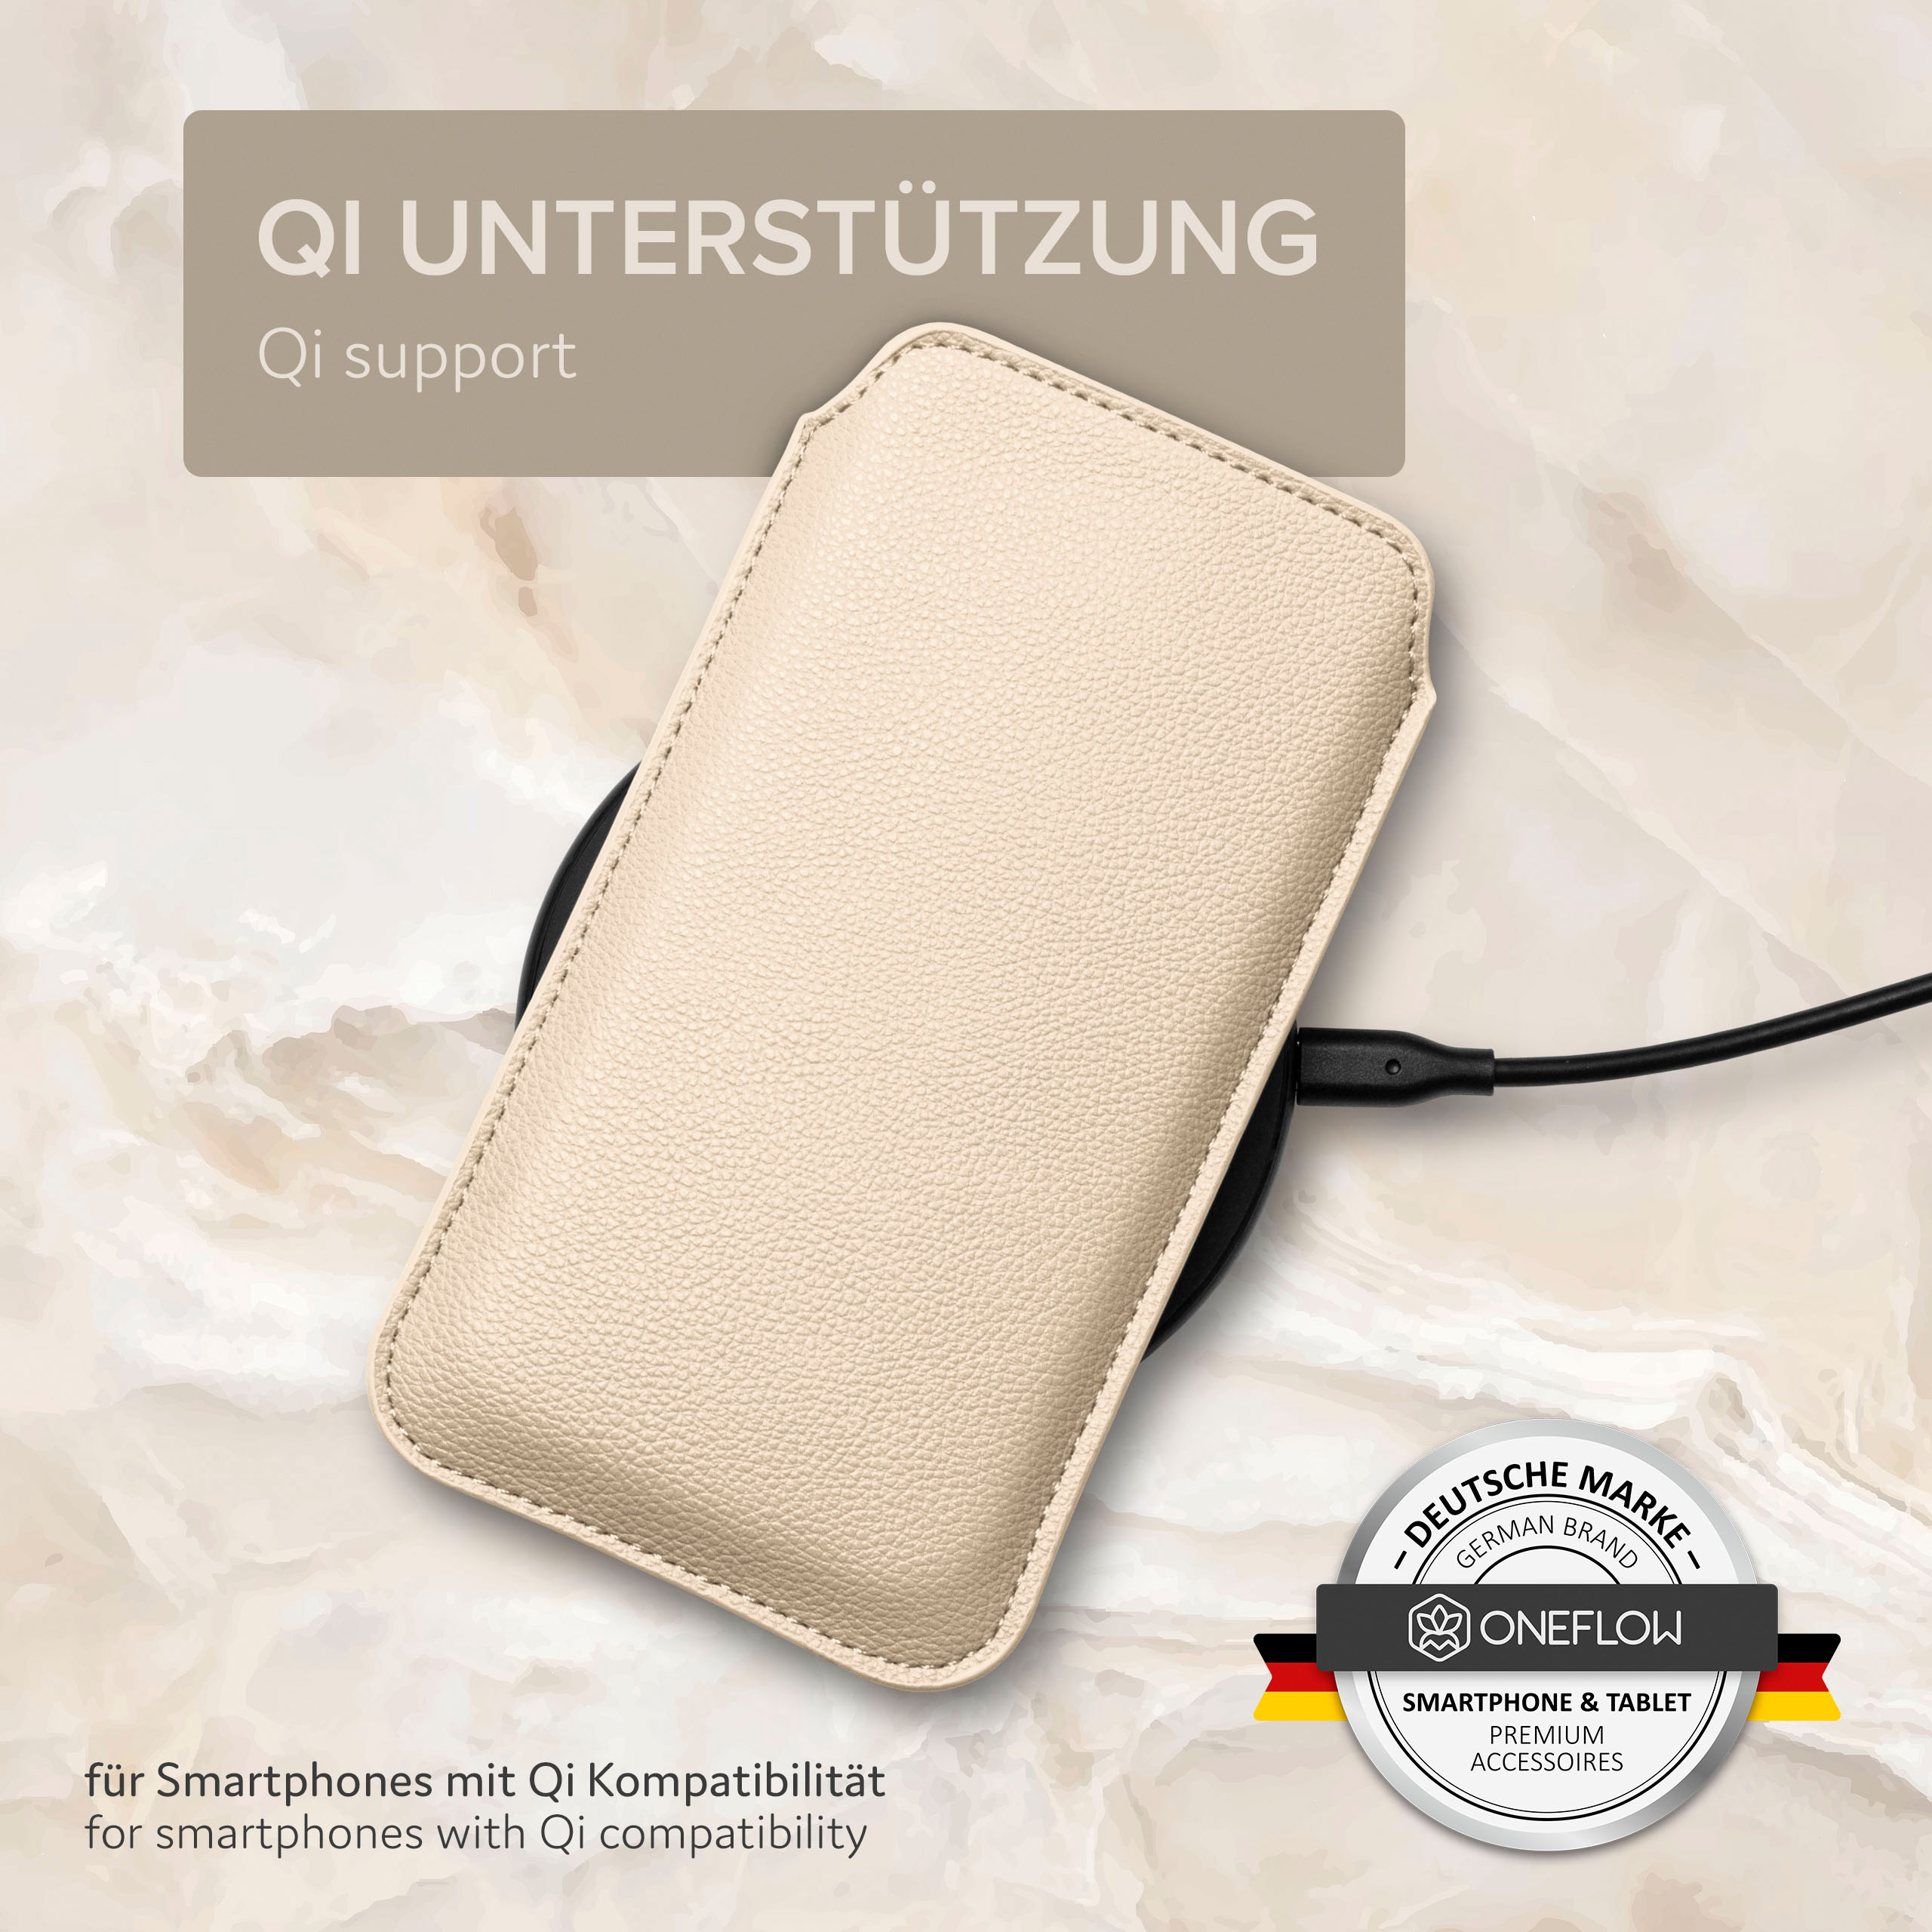 ONEFLOW Einsteckhülle Zuglasche, Xperia Full Z1 mit Sony, Creme Compact, Cover